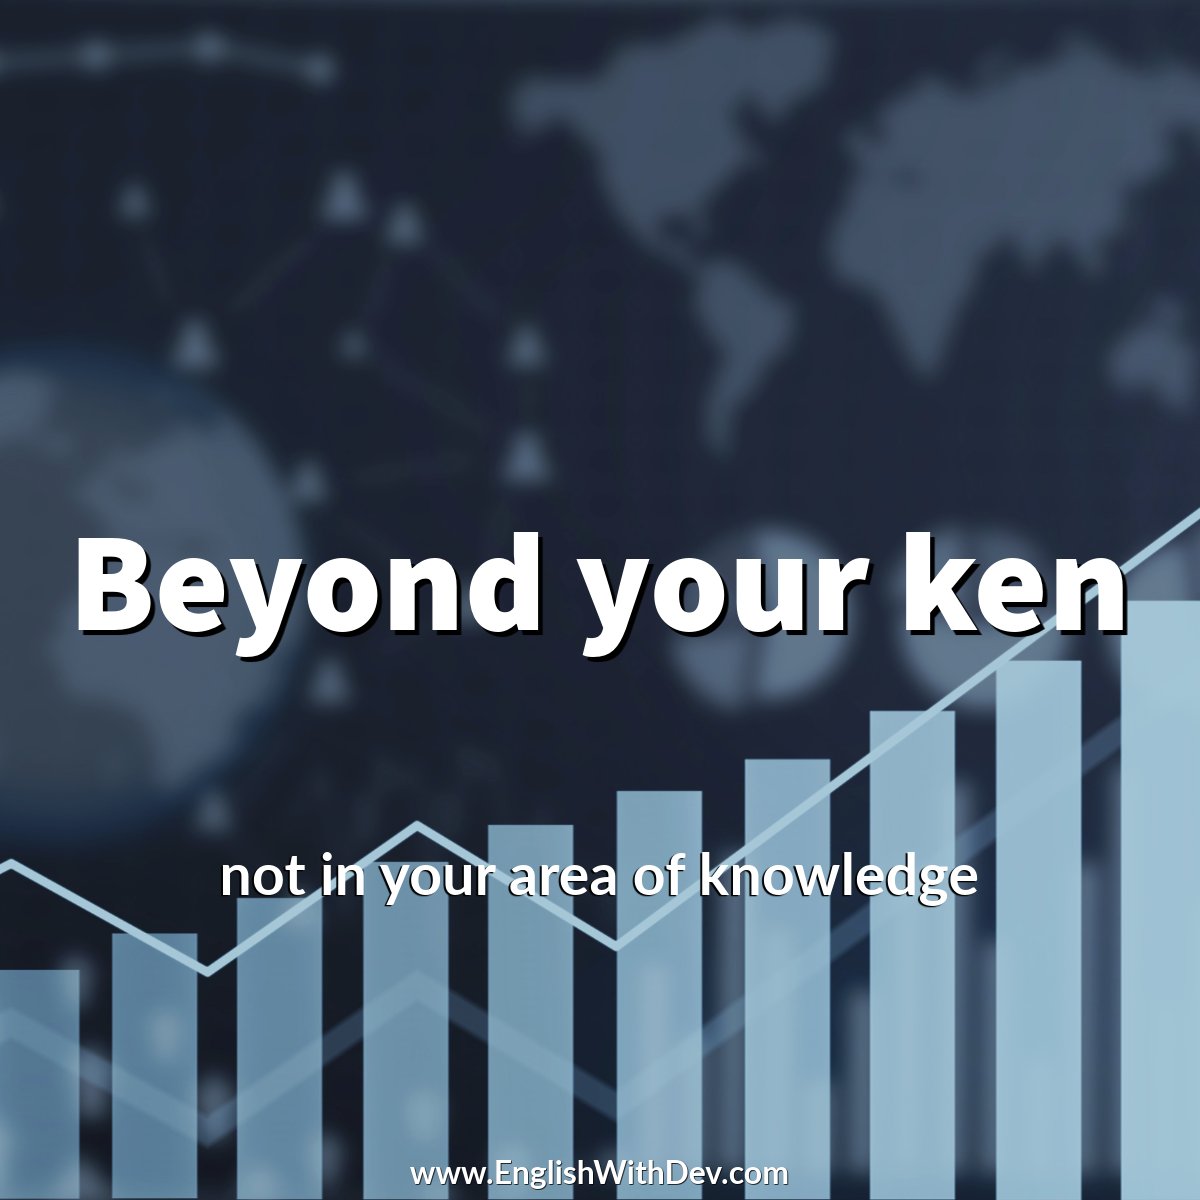 Beyond your ken - not in your area of knowledge

Example - Financial matters are beyond my ken, I'm afraid.

#EnglishWithDev #phraseoftheday #beyondyourken